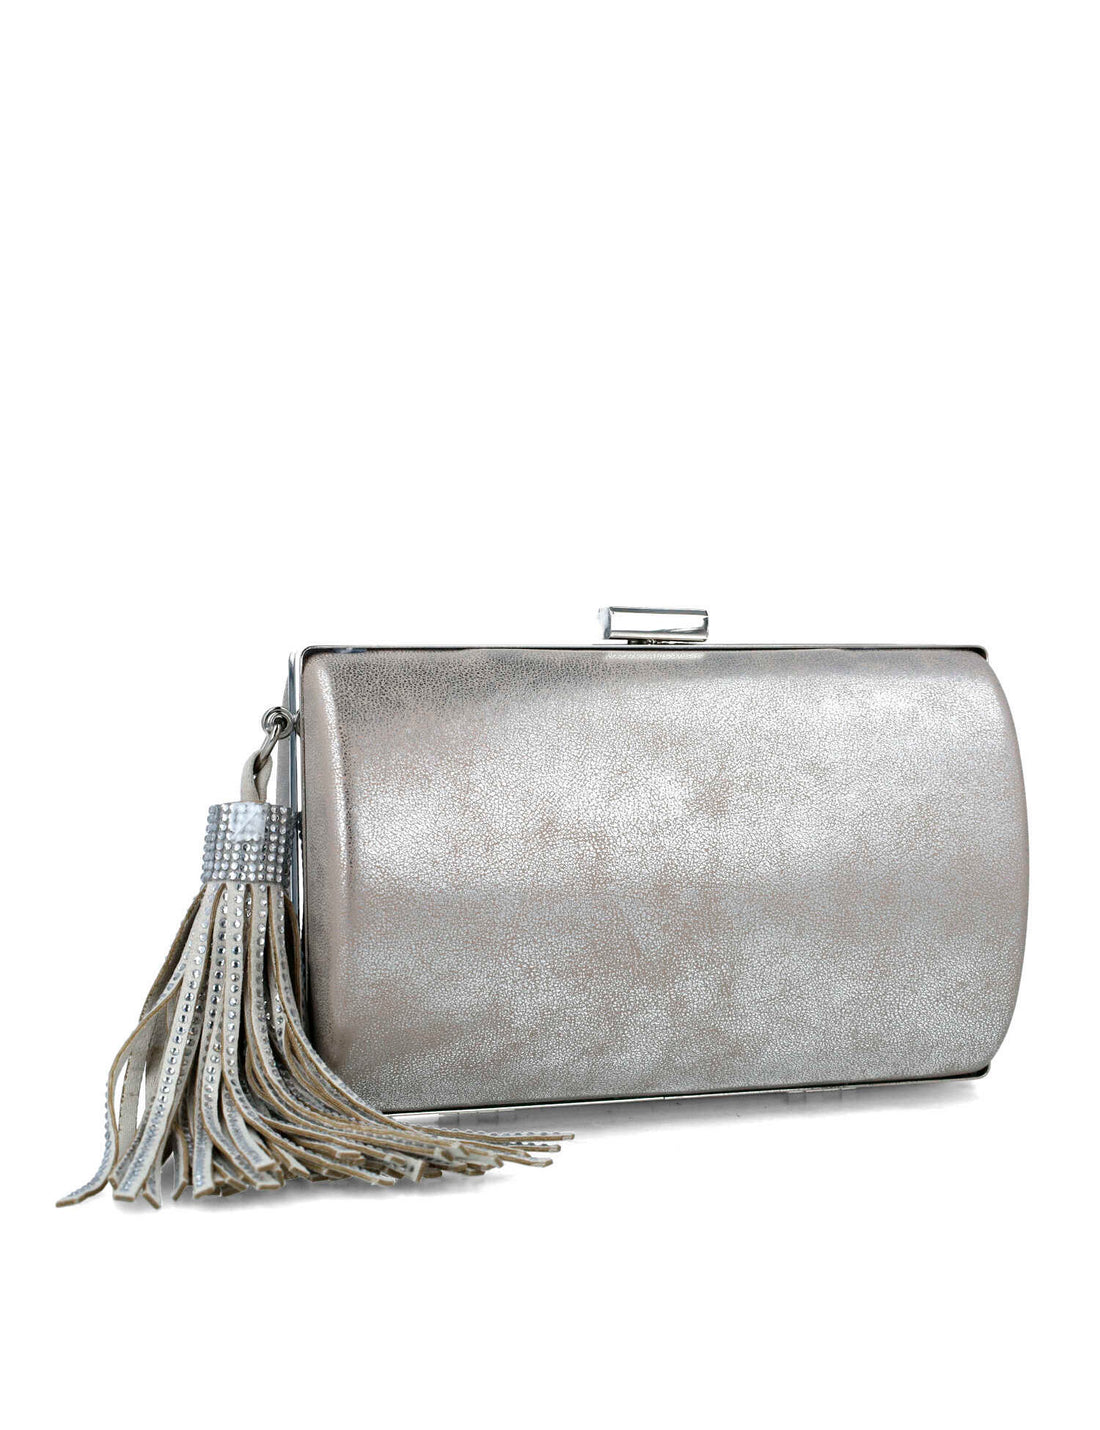 Silver Clutch With Fringe Accessory_85651_09_02